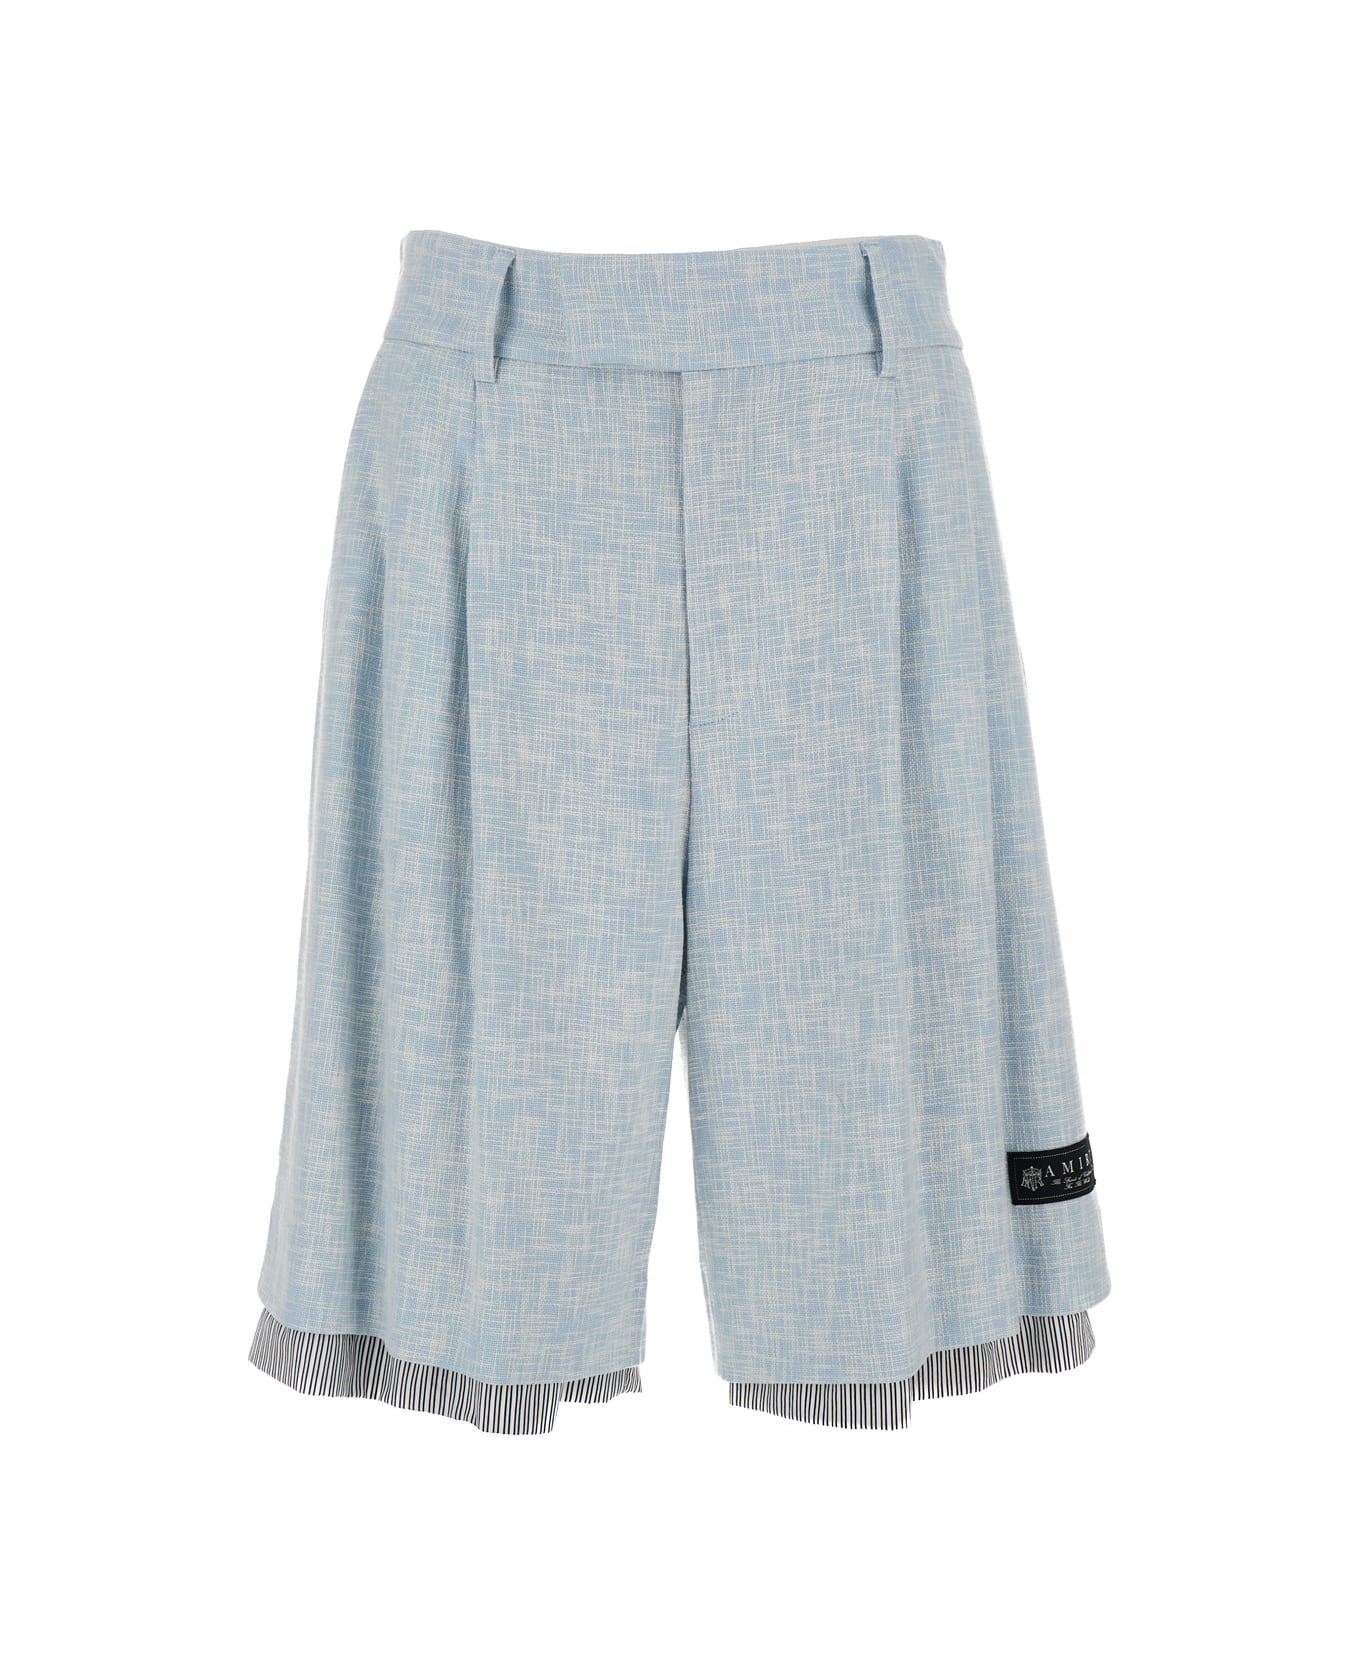 AMIRI Light Blue Layered Bermuda Shorts With Logo Patch In Wool And Cotton Man - Light blue